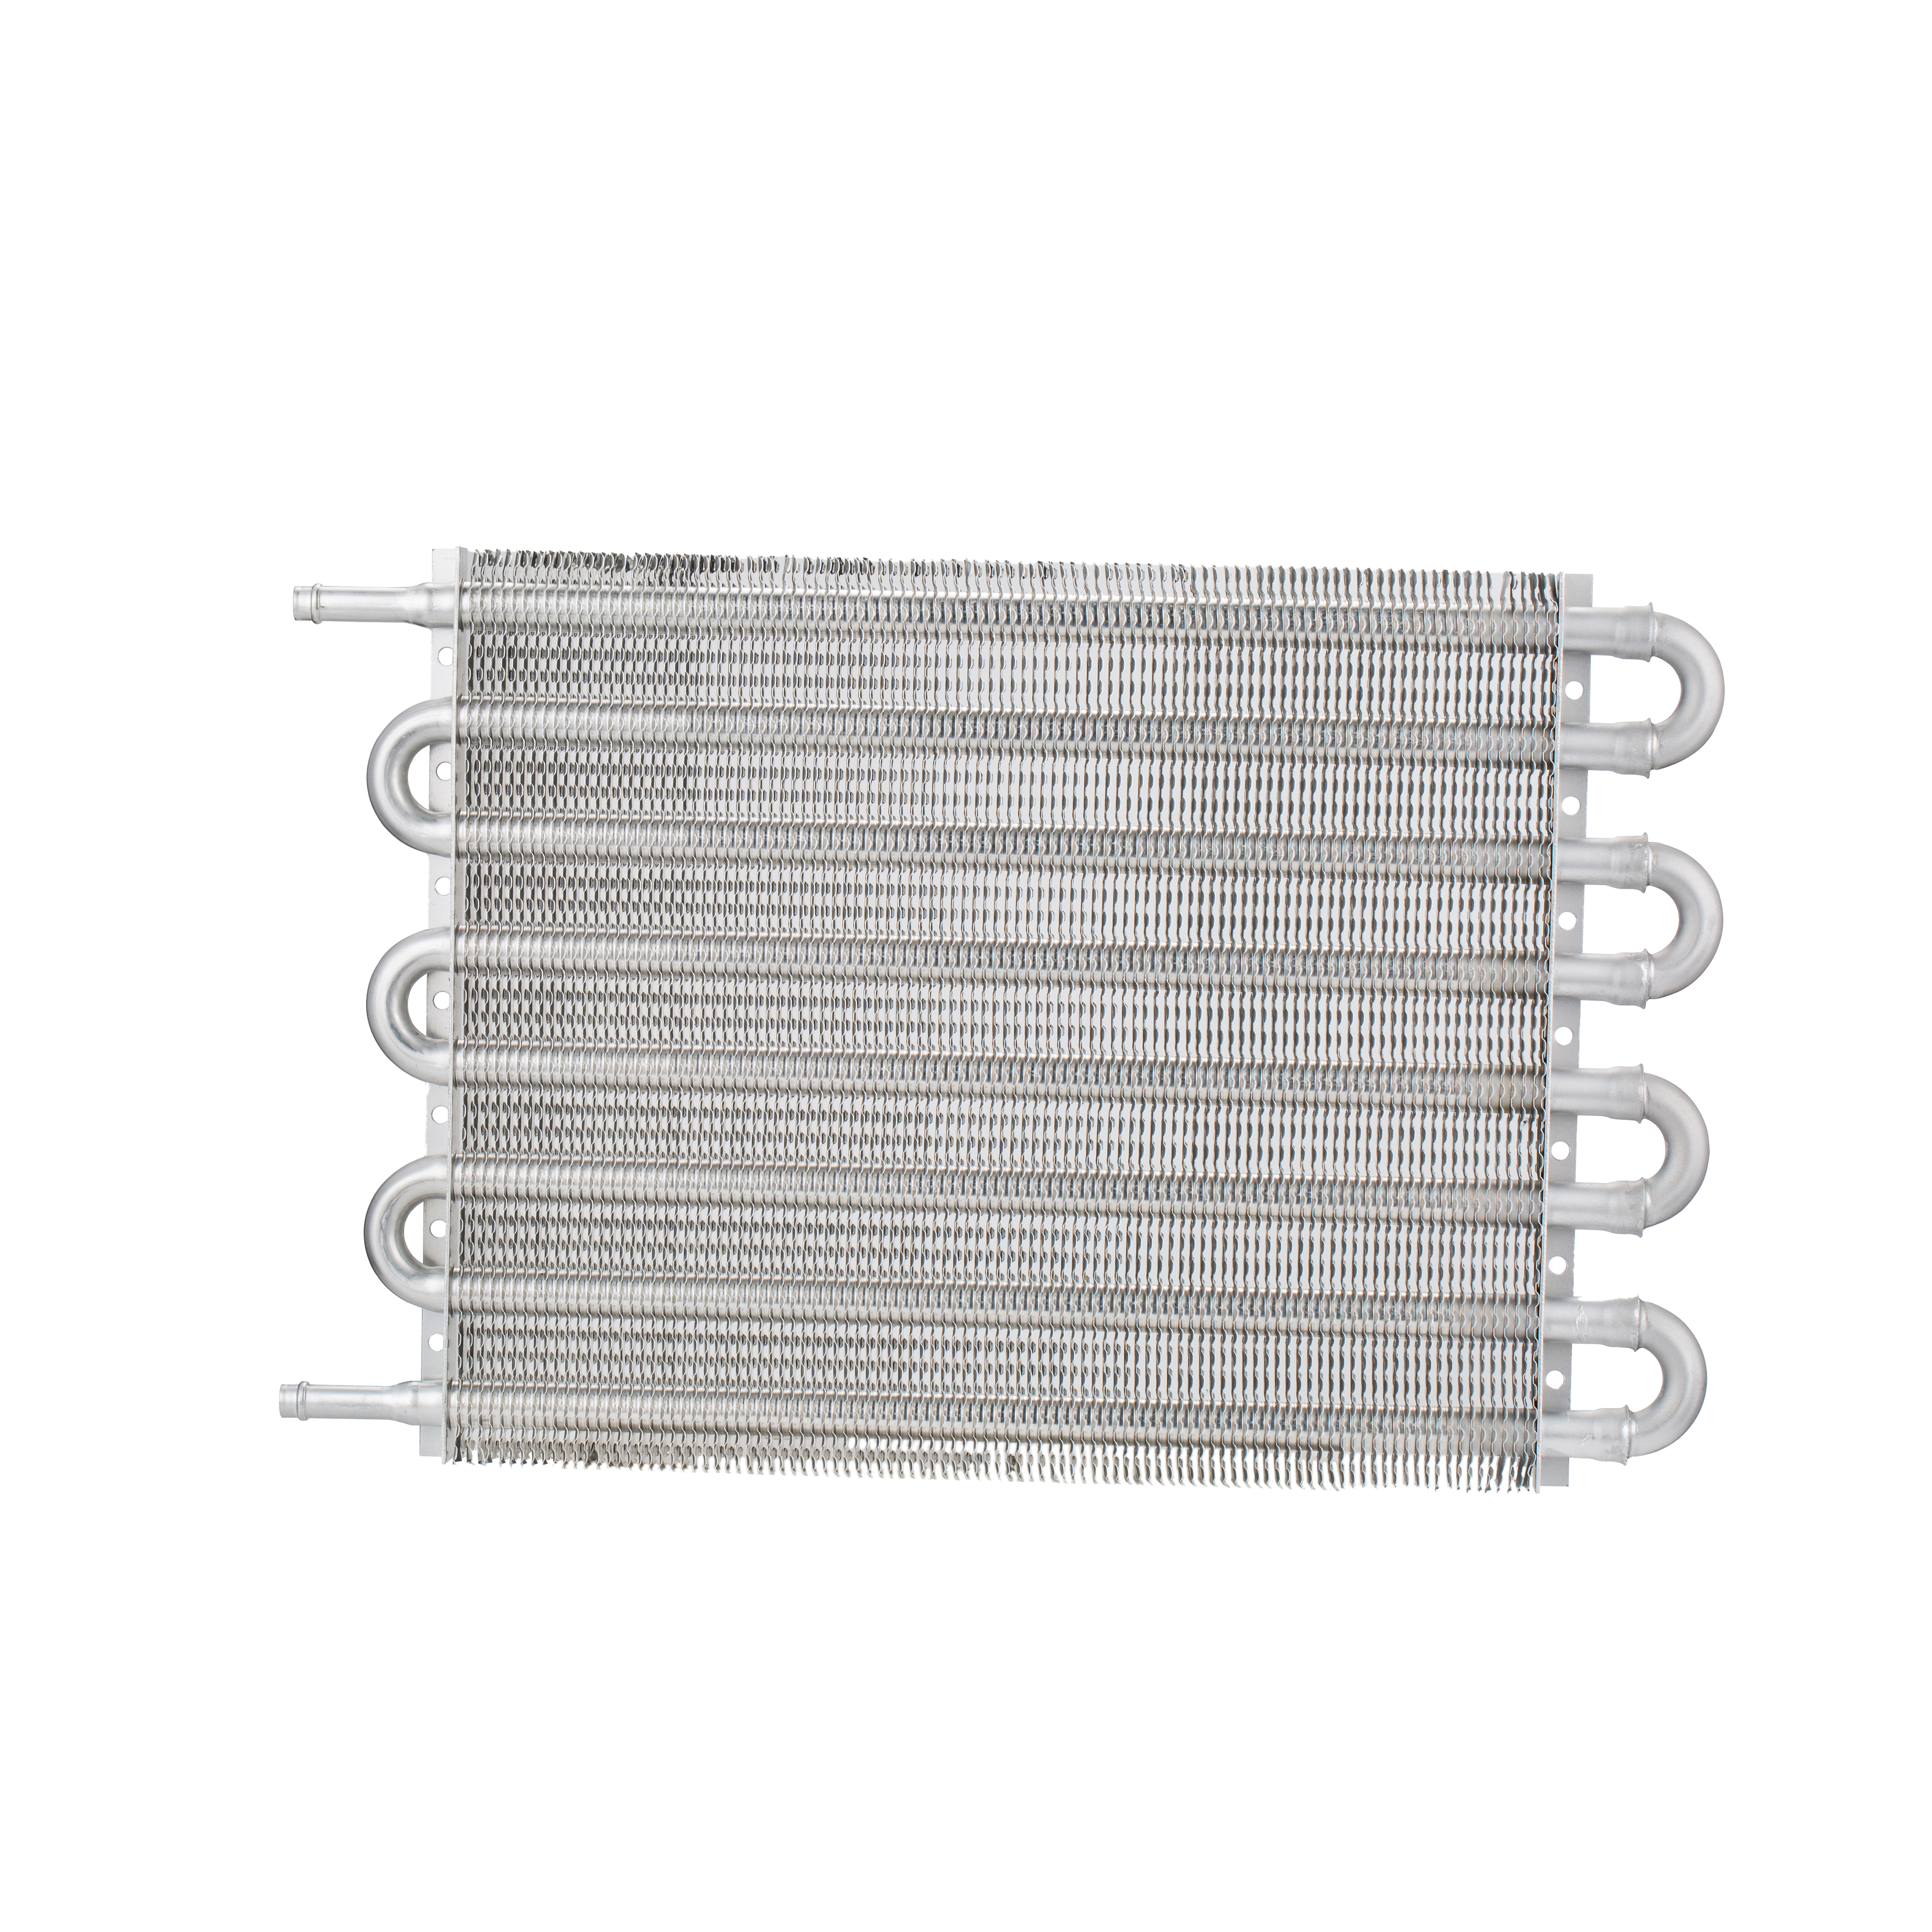 HAOFA Universal Silver color 8 Row 8 Pass Tube and Fin Transmission Cooler Universal Oil Cooler Aluminium